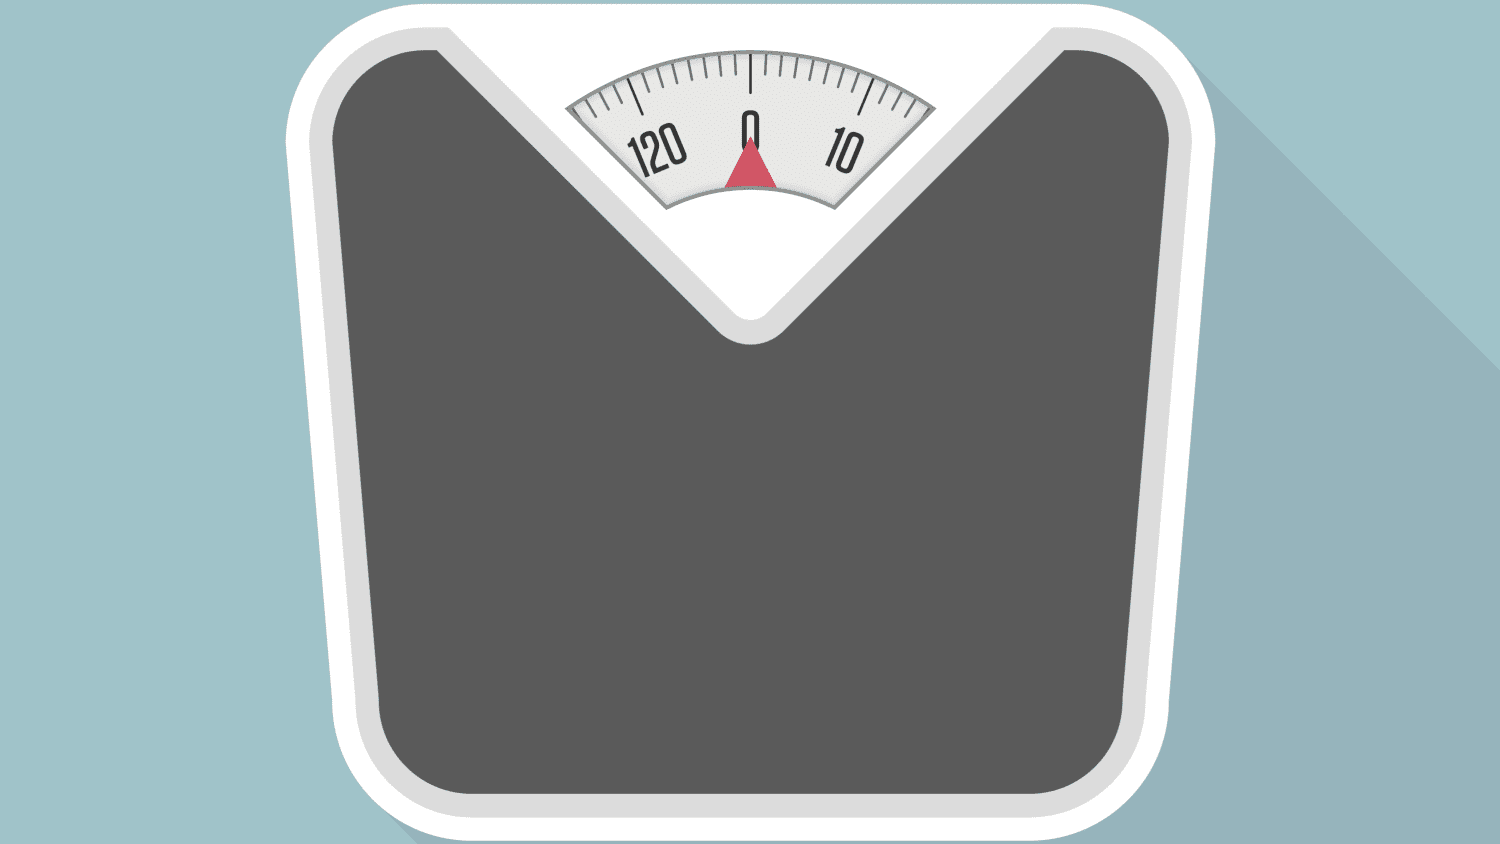 scale representing how BMI alone should not be used to predict health